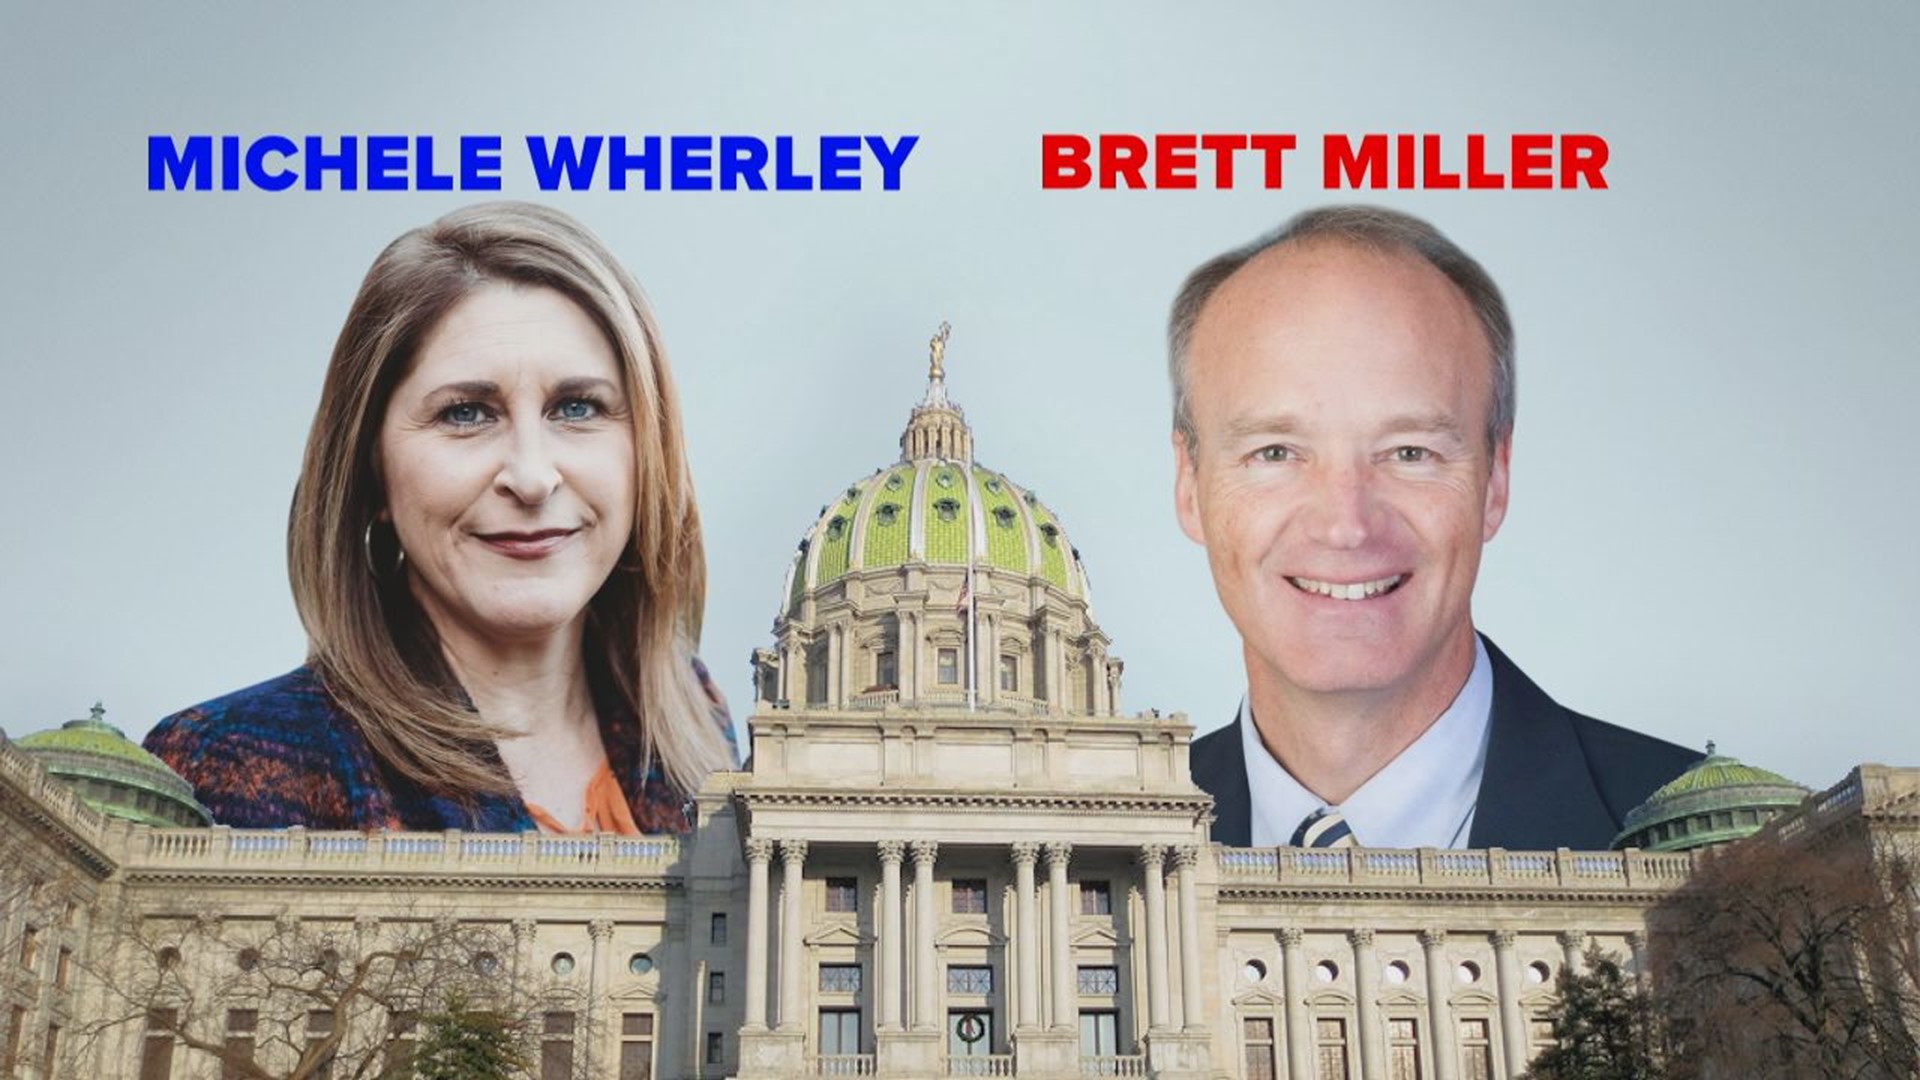 Four-term incumbent Brett Miller is looking to win re-election against Michele Wherley in this western Lancaster County district.